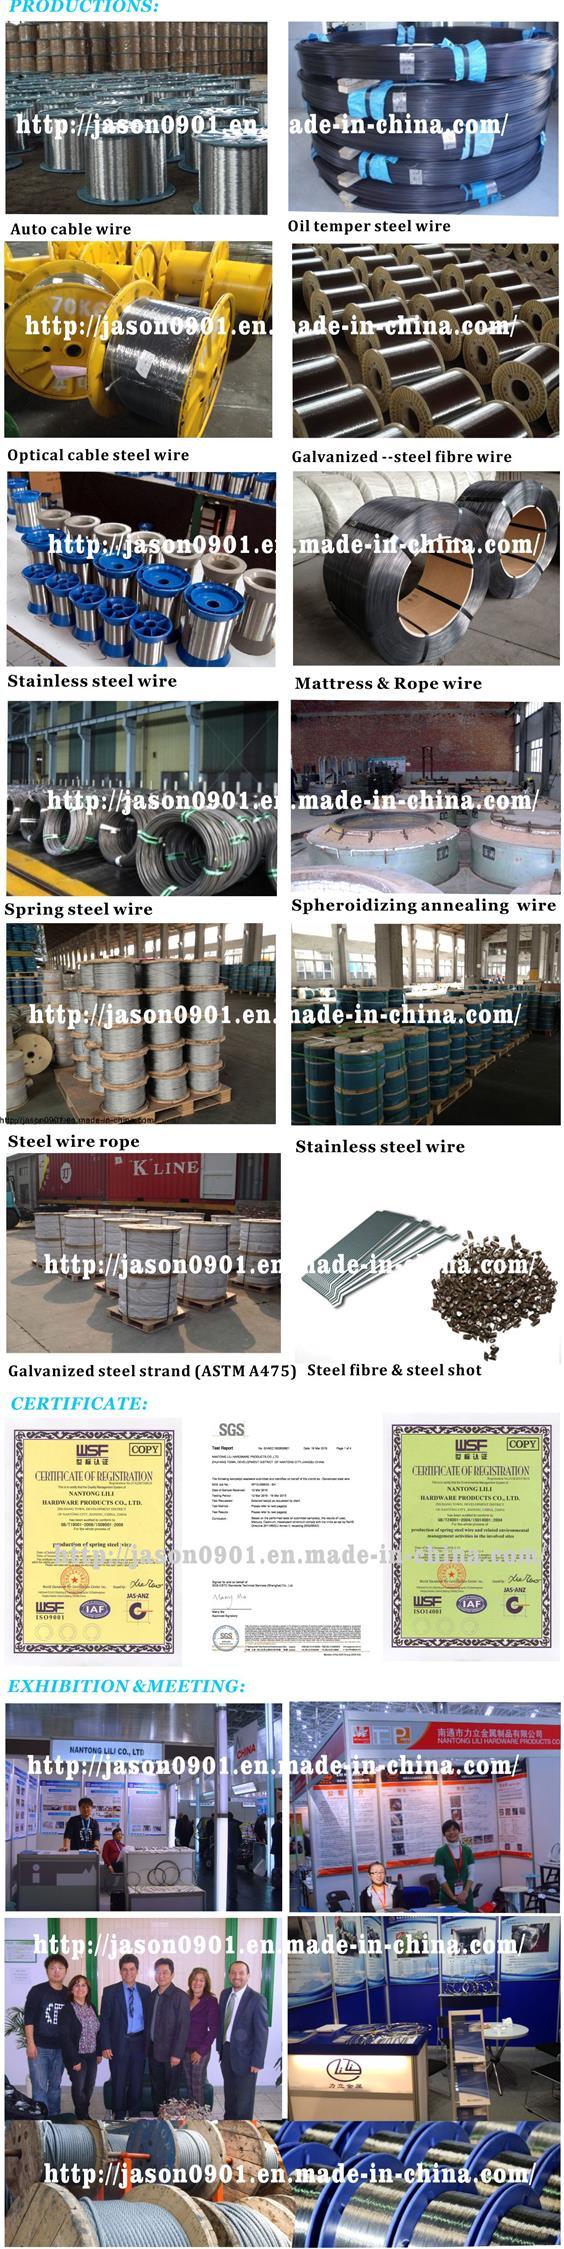 Steel Wire Ropes for Cranes, Wire Rope, Steel Wire Rope, Steel Wire, Stainless Steel Wire